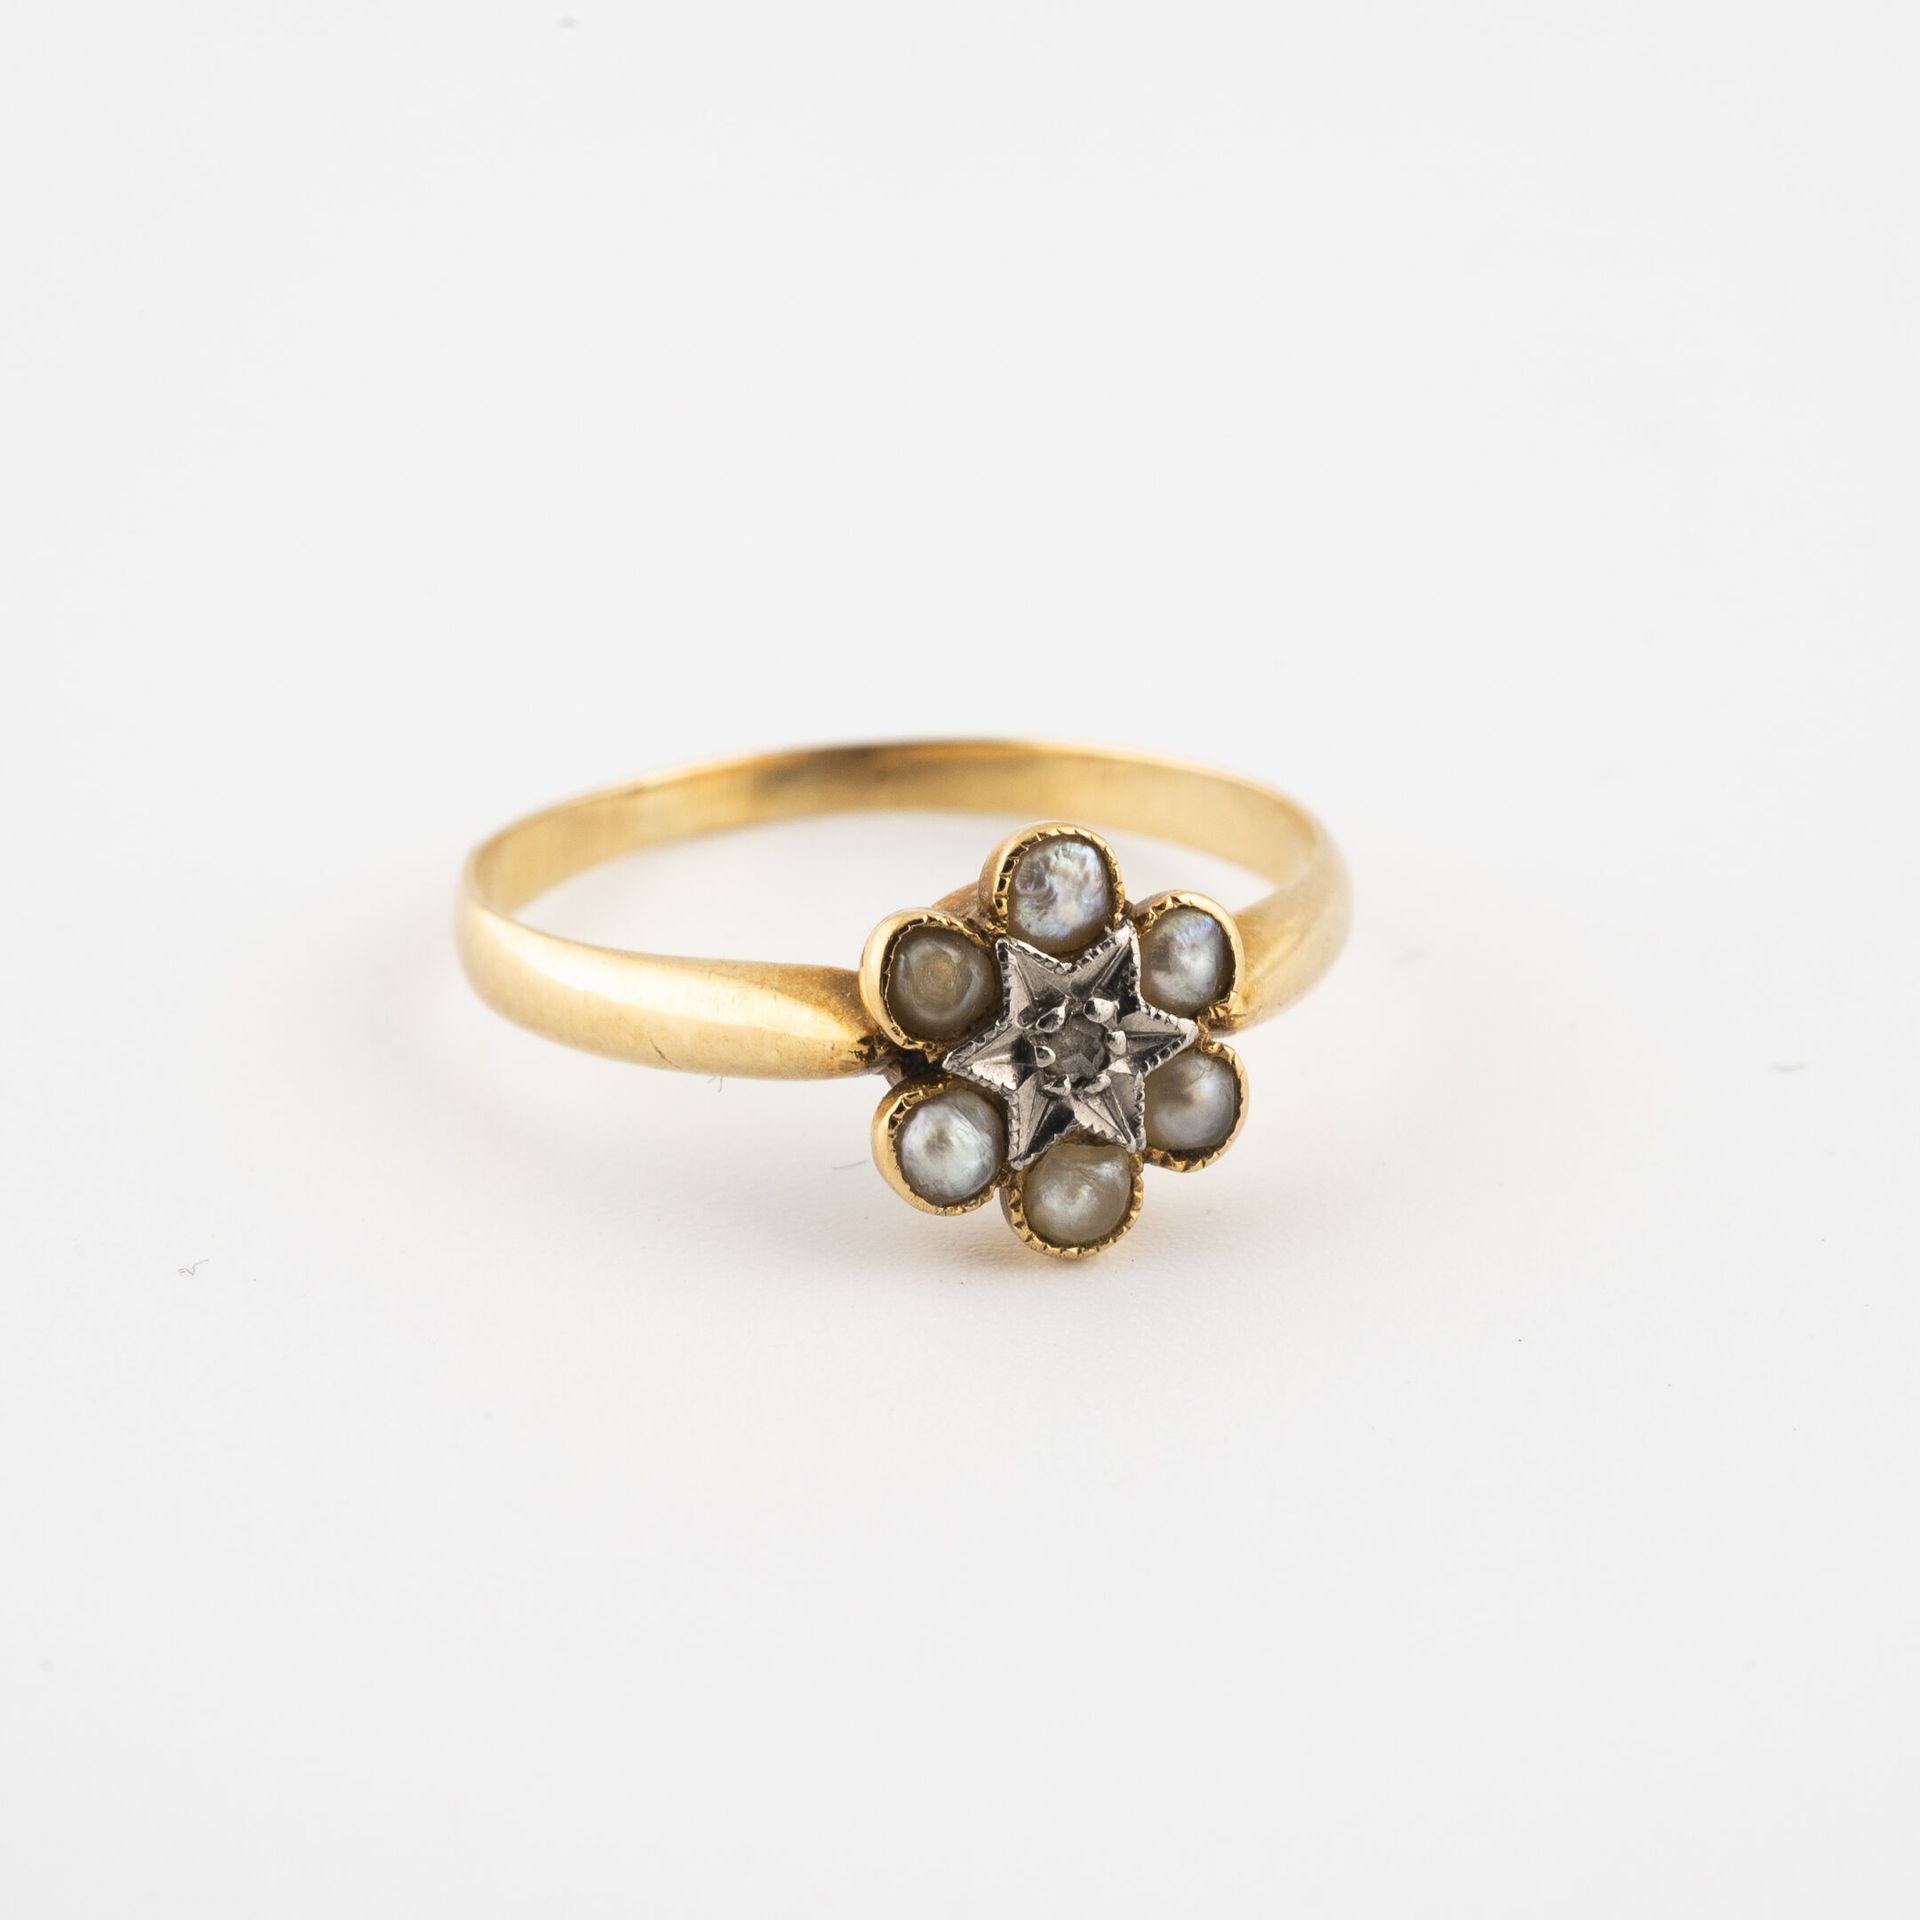 Null Fine yellow gold (750) ring with a daisy motif centered on an old-cut diamo&hellip;